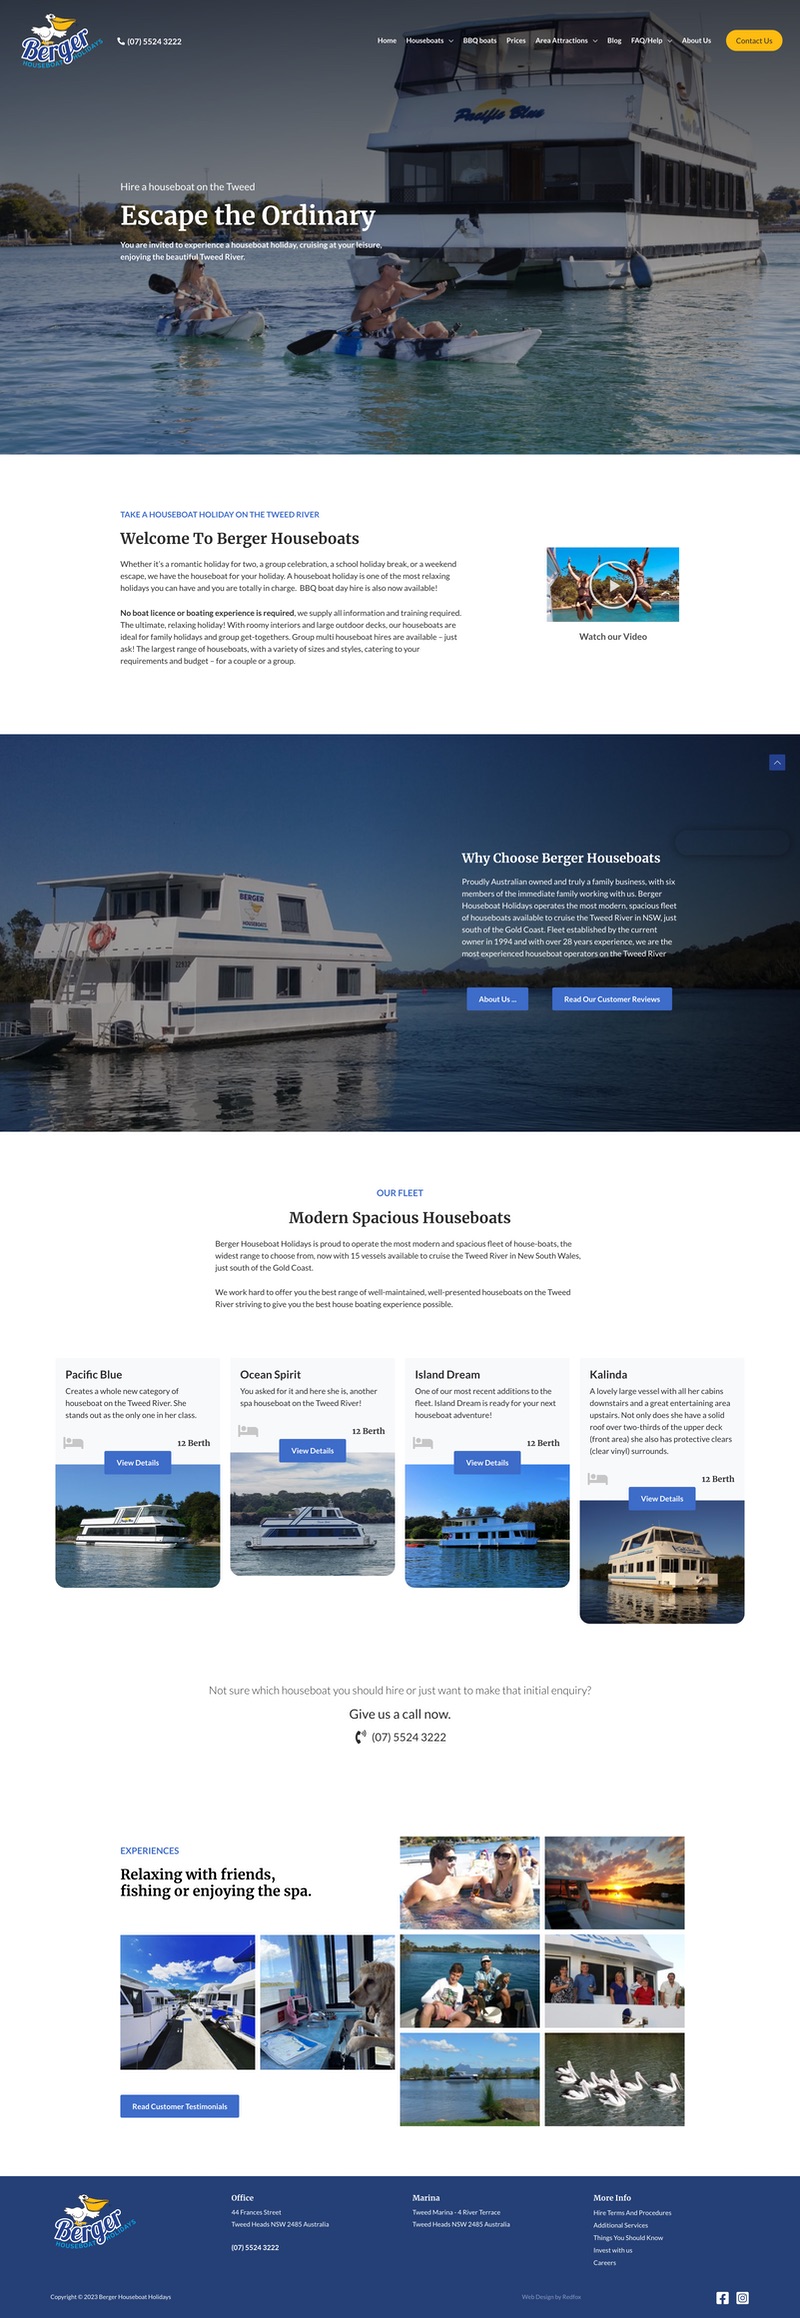 Tweed River Houseboat Hire